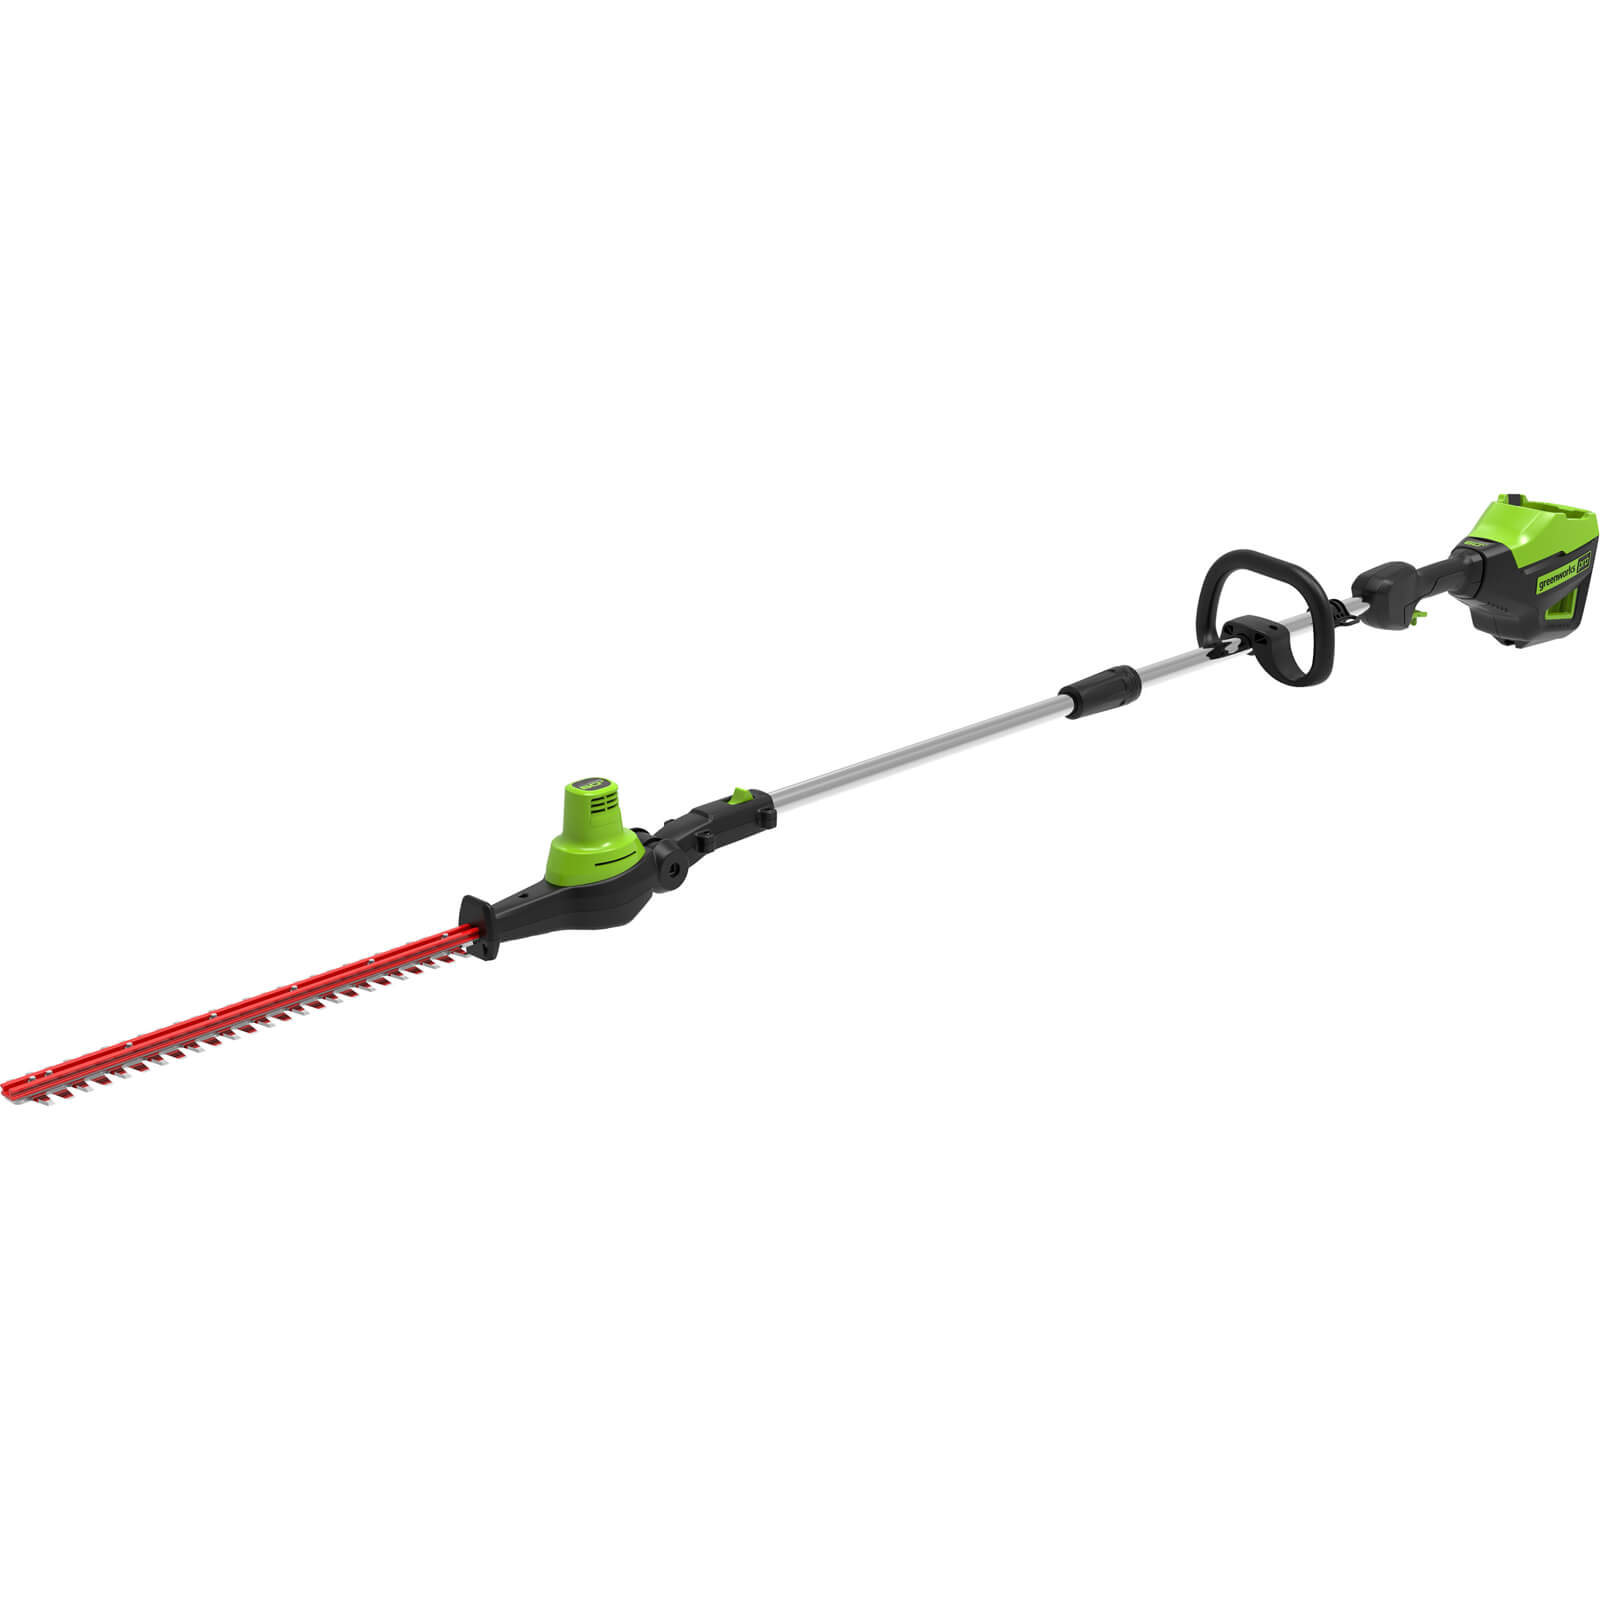 Greenworks GD60PHT51 60v Cordless Brushless Long Reach Hedge Trimmer 510mm No Batteries No Charger FREE Gloves, Lubricant & Safety Glasses Worth £12